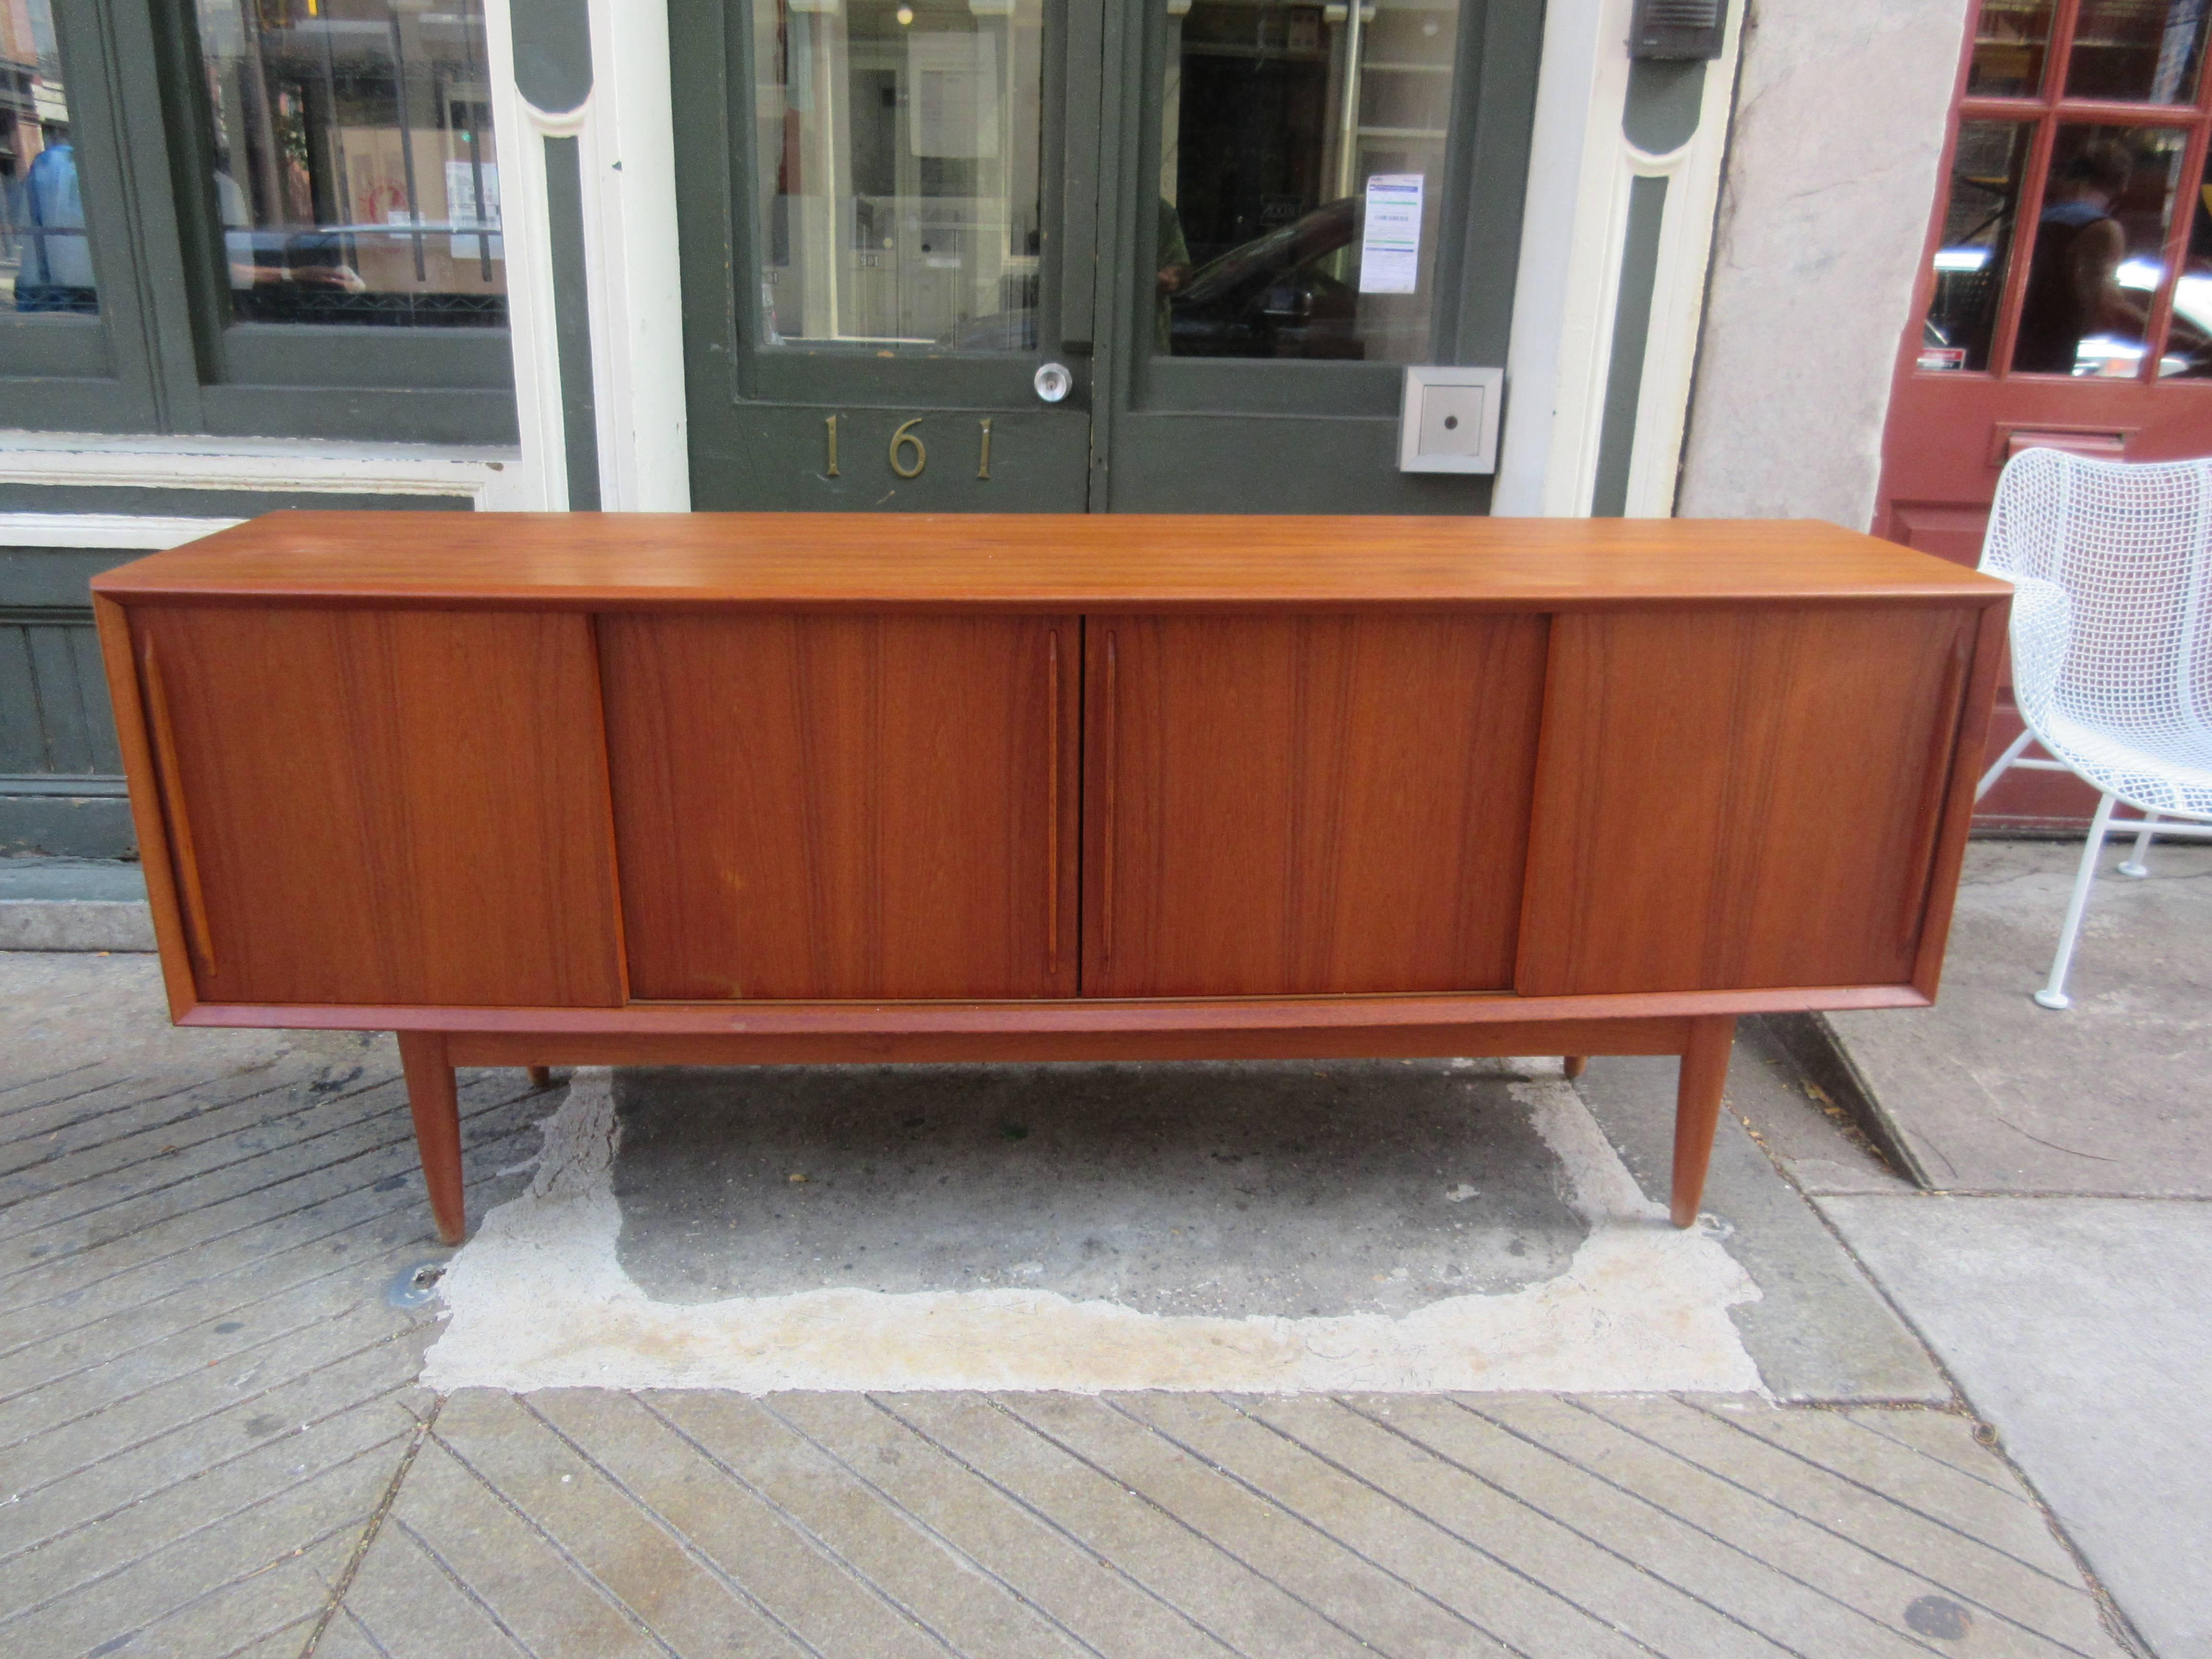 Great design teak credenza with a bowed front, very slight curve comes out in the middle 2" more than ends. Beautiful rich teak grain and color, all original! four sliding doors reveal pull-out drawers on the left, double open area in middle